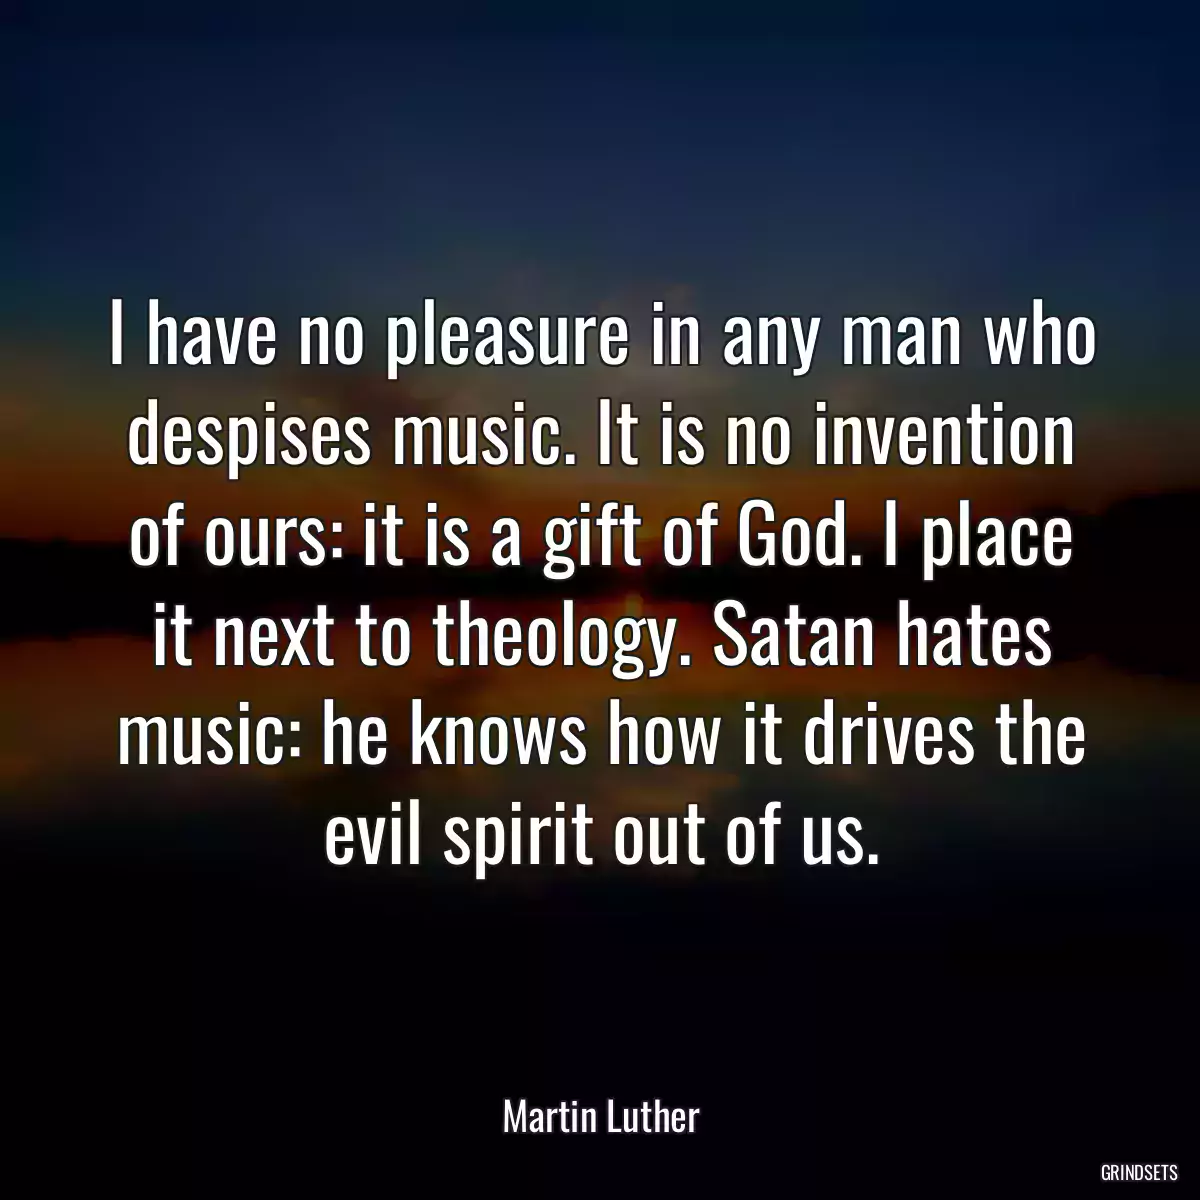 I have no pleasure in any man who despises music. It is no invention of ours: it is a gift of God. I place it next to theology. Satan hates music: he knows how it drives the evil spirit out of us.